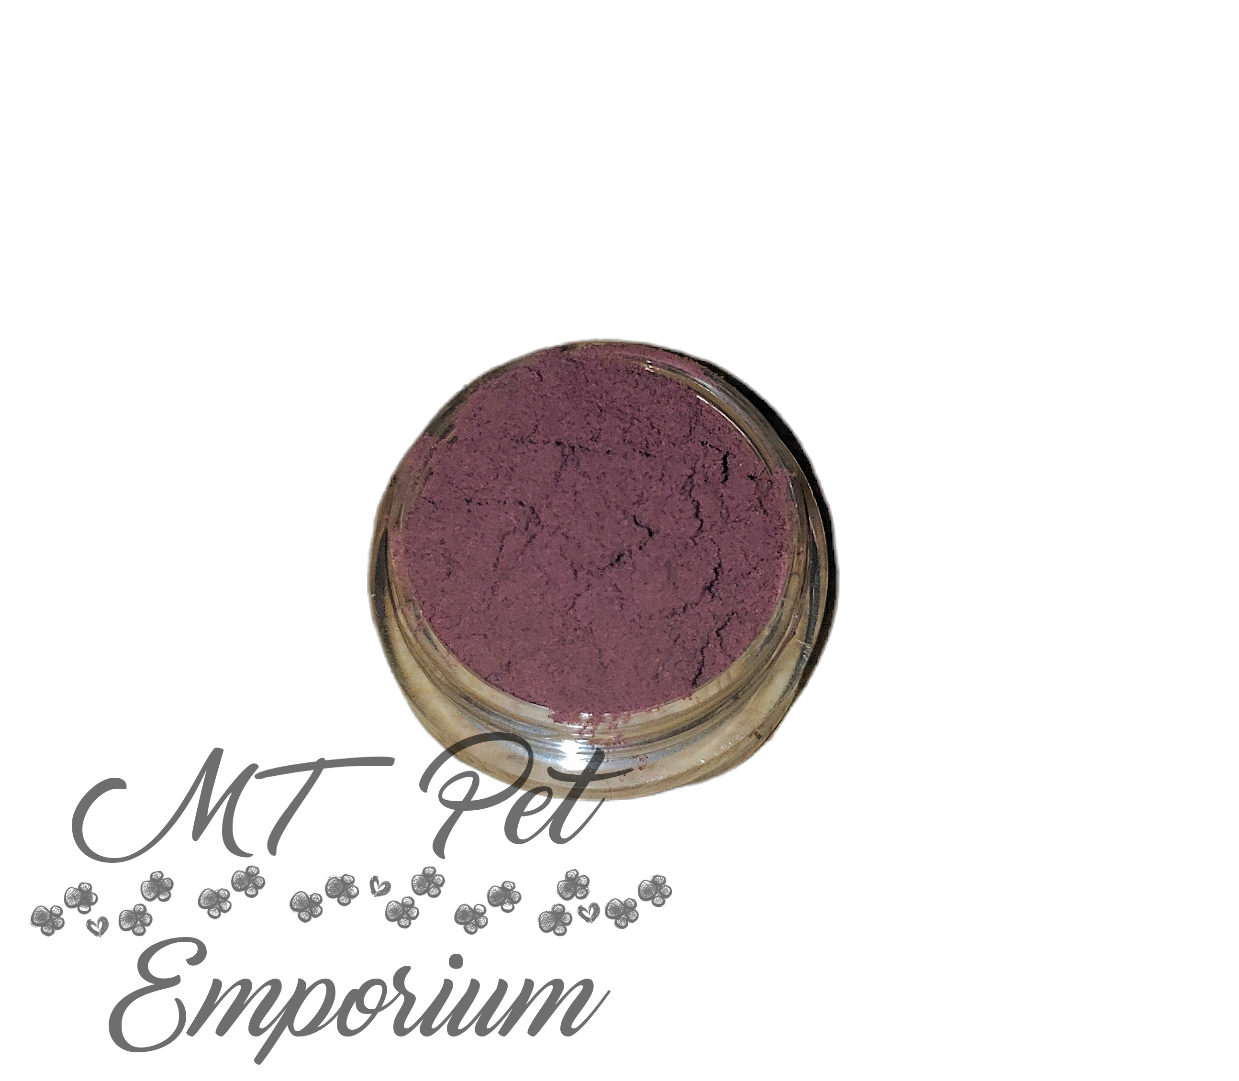 Mulberry Powder - FREE for orders $10.00 and over. (After all discounts and before shipping, ONE FREEBIE PER SHIPMENT.)